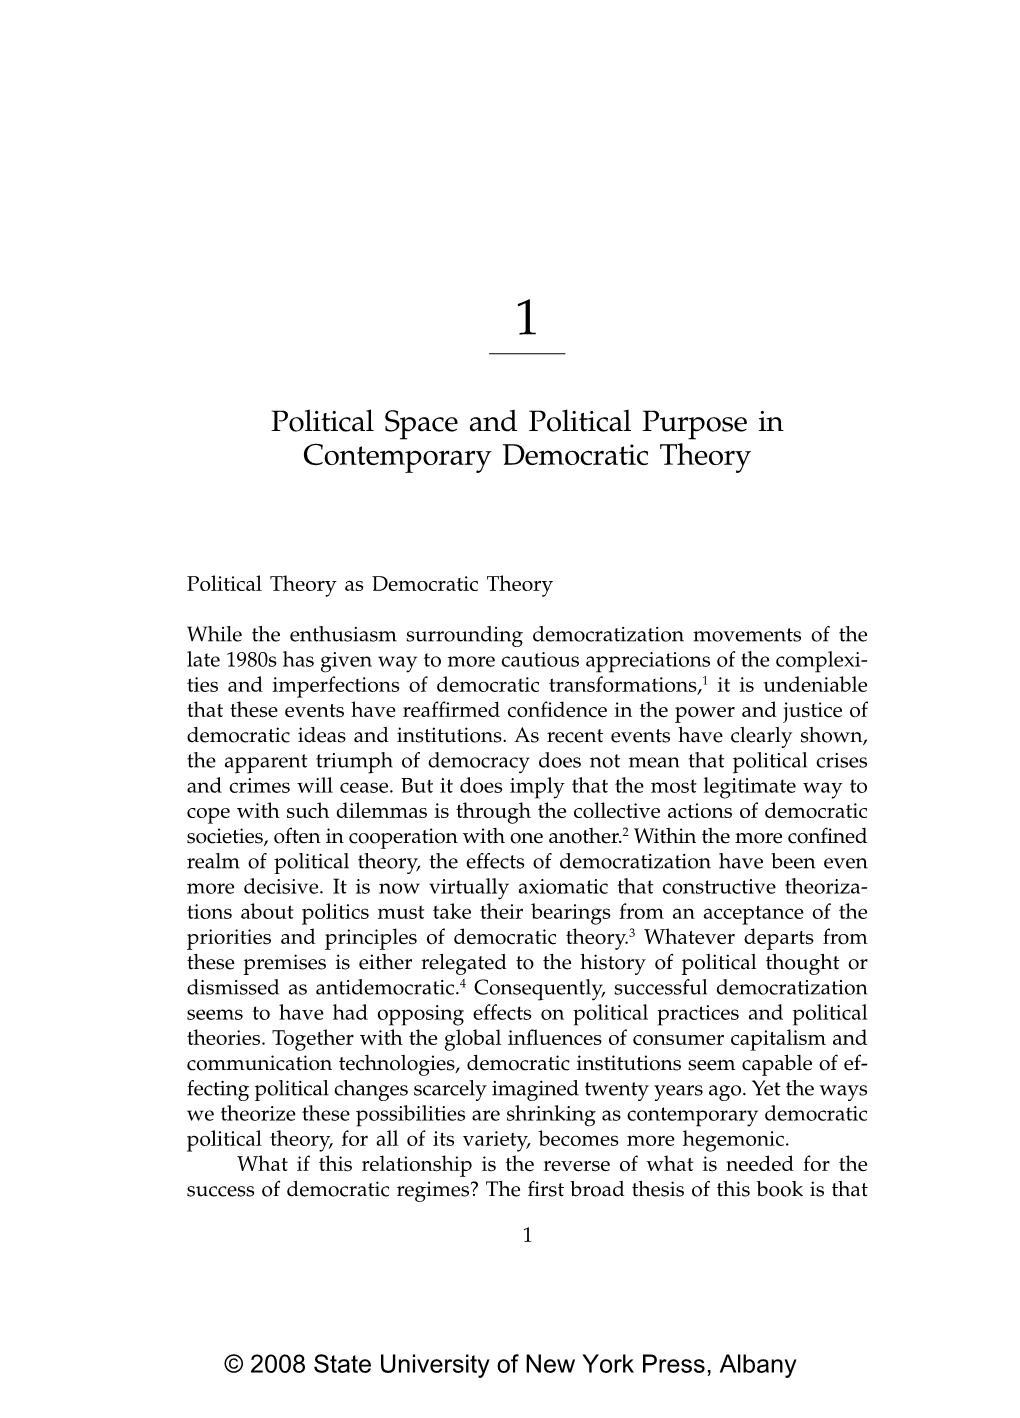 Political Space and Political Purpose in Contemporary Democratic Theory